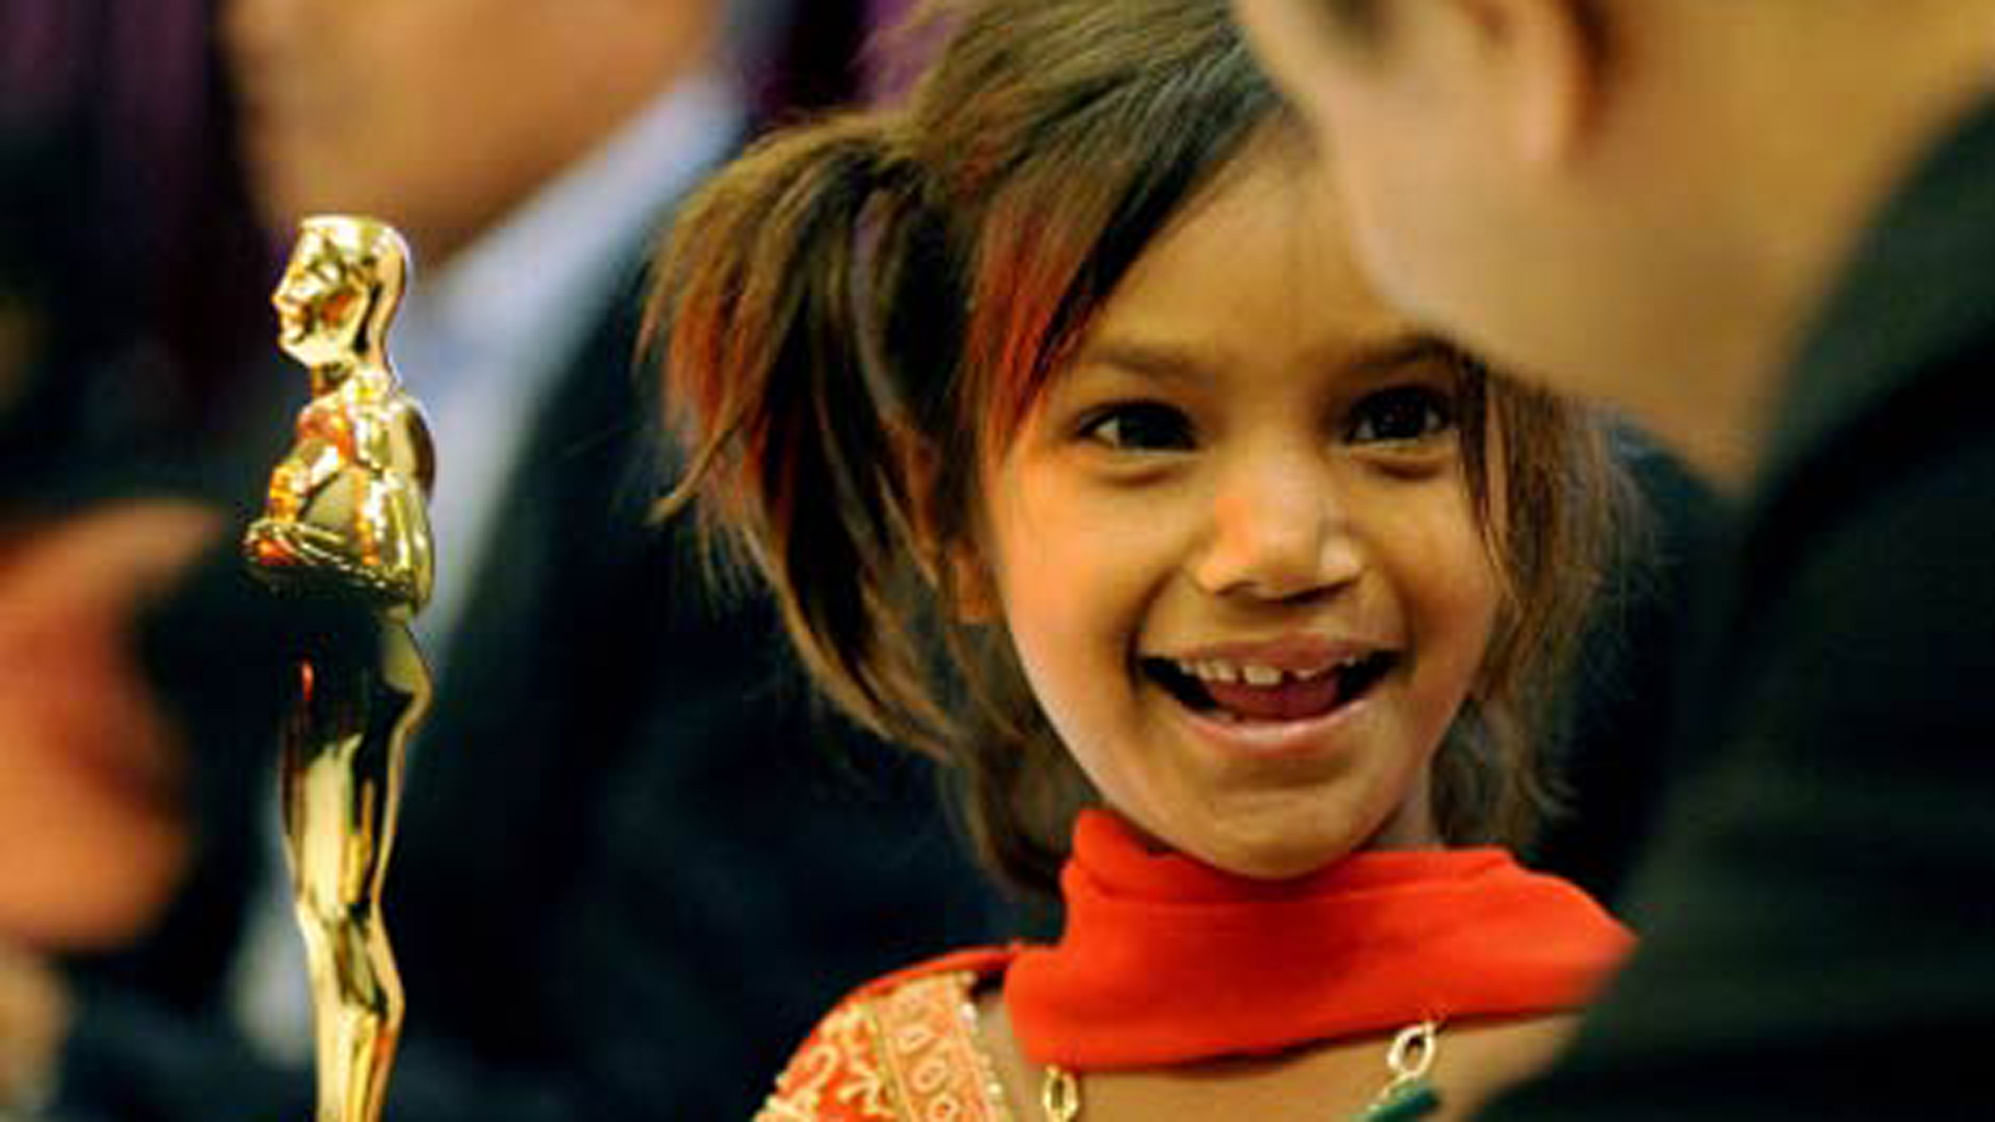 A photo of Pinki, after her cleft lip was surgically removed, with the Oscar for the documentary <i>Smile Pinki</i>. (Photo Courtesy: <a href="https://nimis540.wordpress.com/2009/02/24/smile-pinki-bringing-smile-to-thousands-of-kids-with-cleft-lips/">nimis540.wordpress.com</a>)